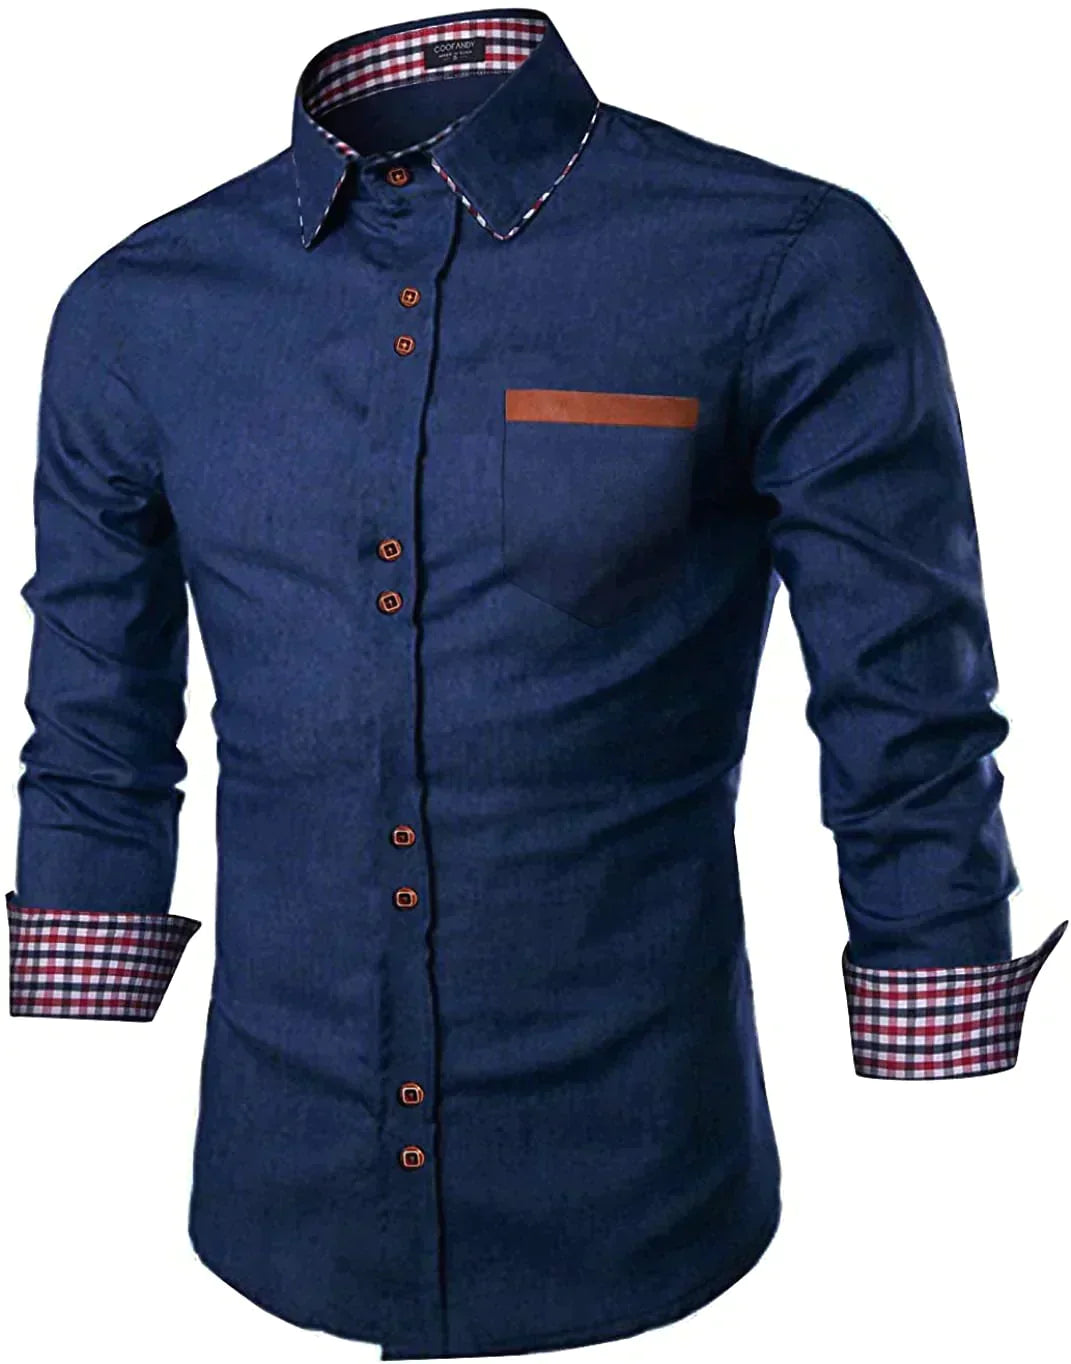 Casual Button Down Denim Shirt with Pocket (US Only) Shirts COOFANDY Store Dark Blue S 